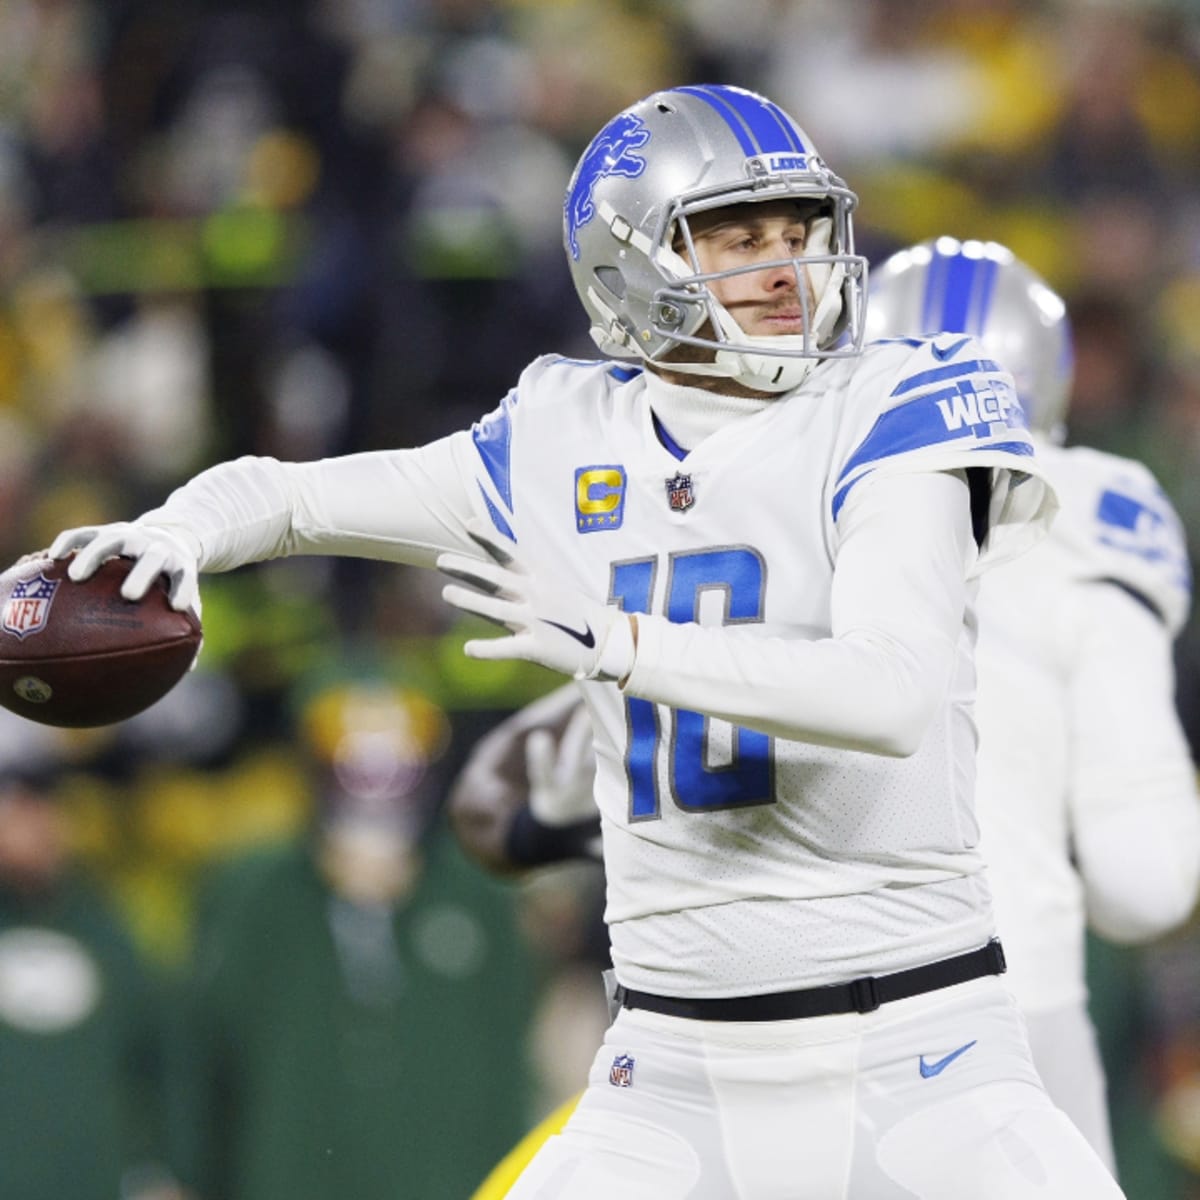 Lions vs Packers NFL Week 4 Thursday Night Football picks and predictions -  The Falcoholic